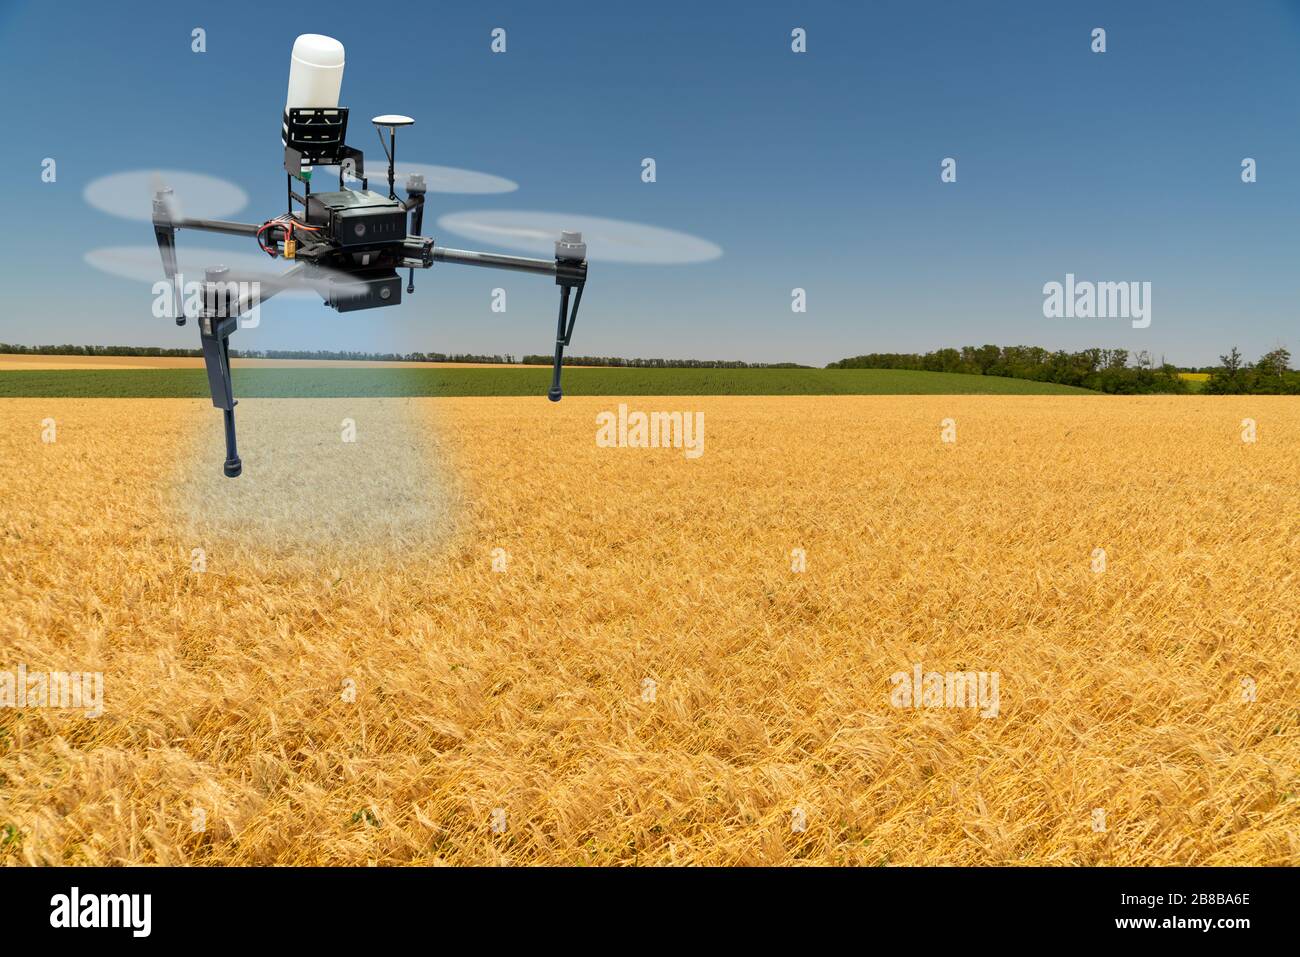 Drone sprayer flies over a wheat field. Smart farming and precision agriculture Stock Photo